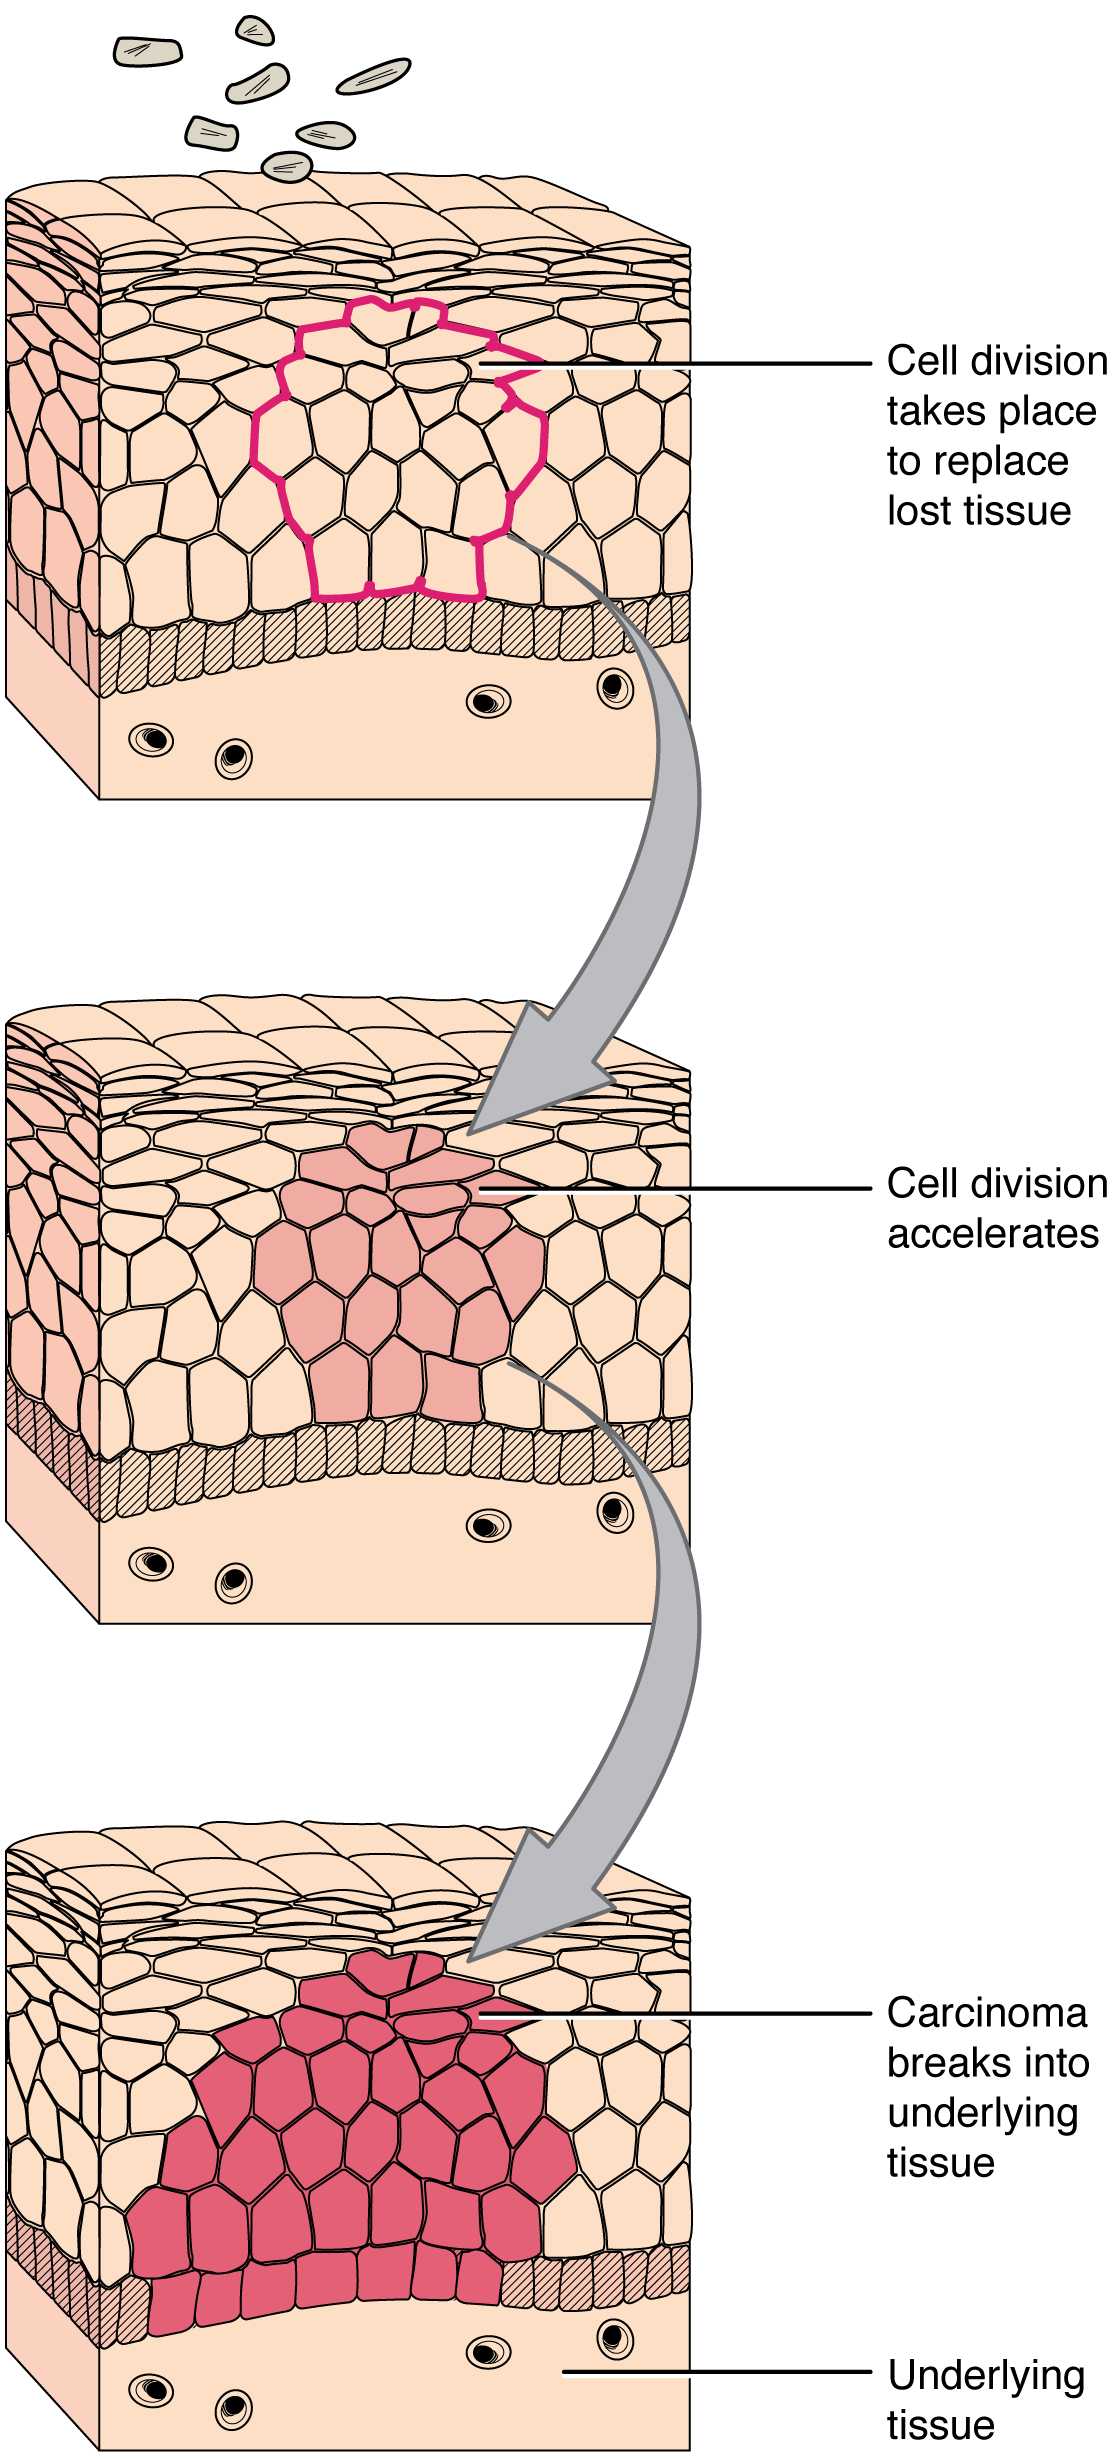 This series of three diagrams shows the development of cancer in epithelial cells. In all three diagrams, layers of epithelial tissue cover a generic underlying tissue. In the first diagram, an injury kills a section of the epithelial cells. In the second image, new epithelial cells have completely filled in the wounded area. However, cell division is still accelerating. In the lowest diagram, the epithelial cells have continued to divide and have now expanded beyond the original wound area. The group of dividing cells, now called a carcinoma, breaks into the layer of underlying tissue.